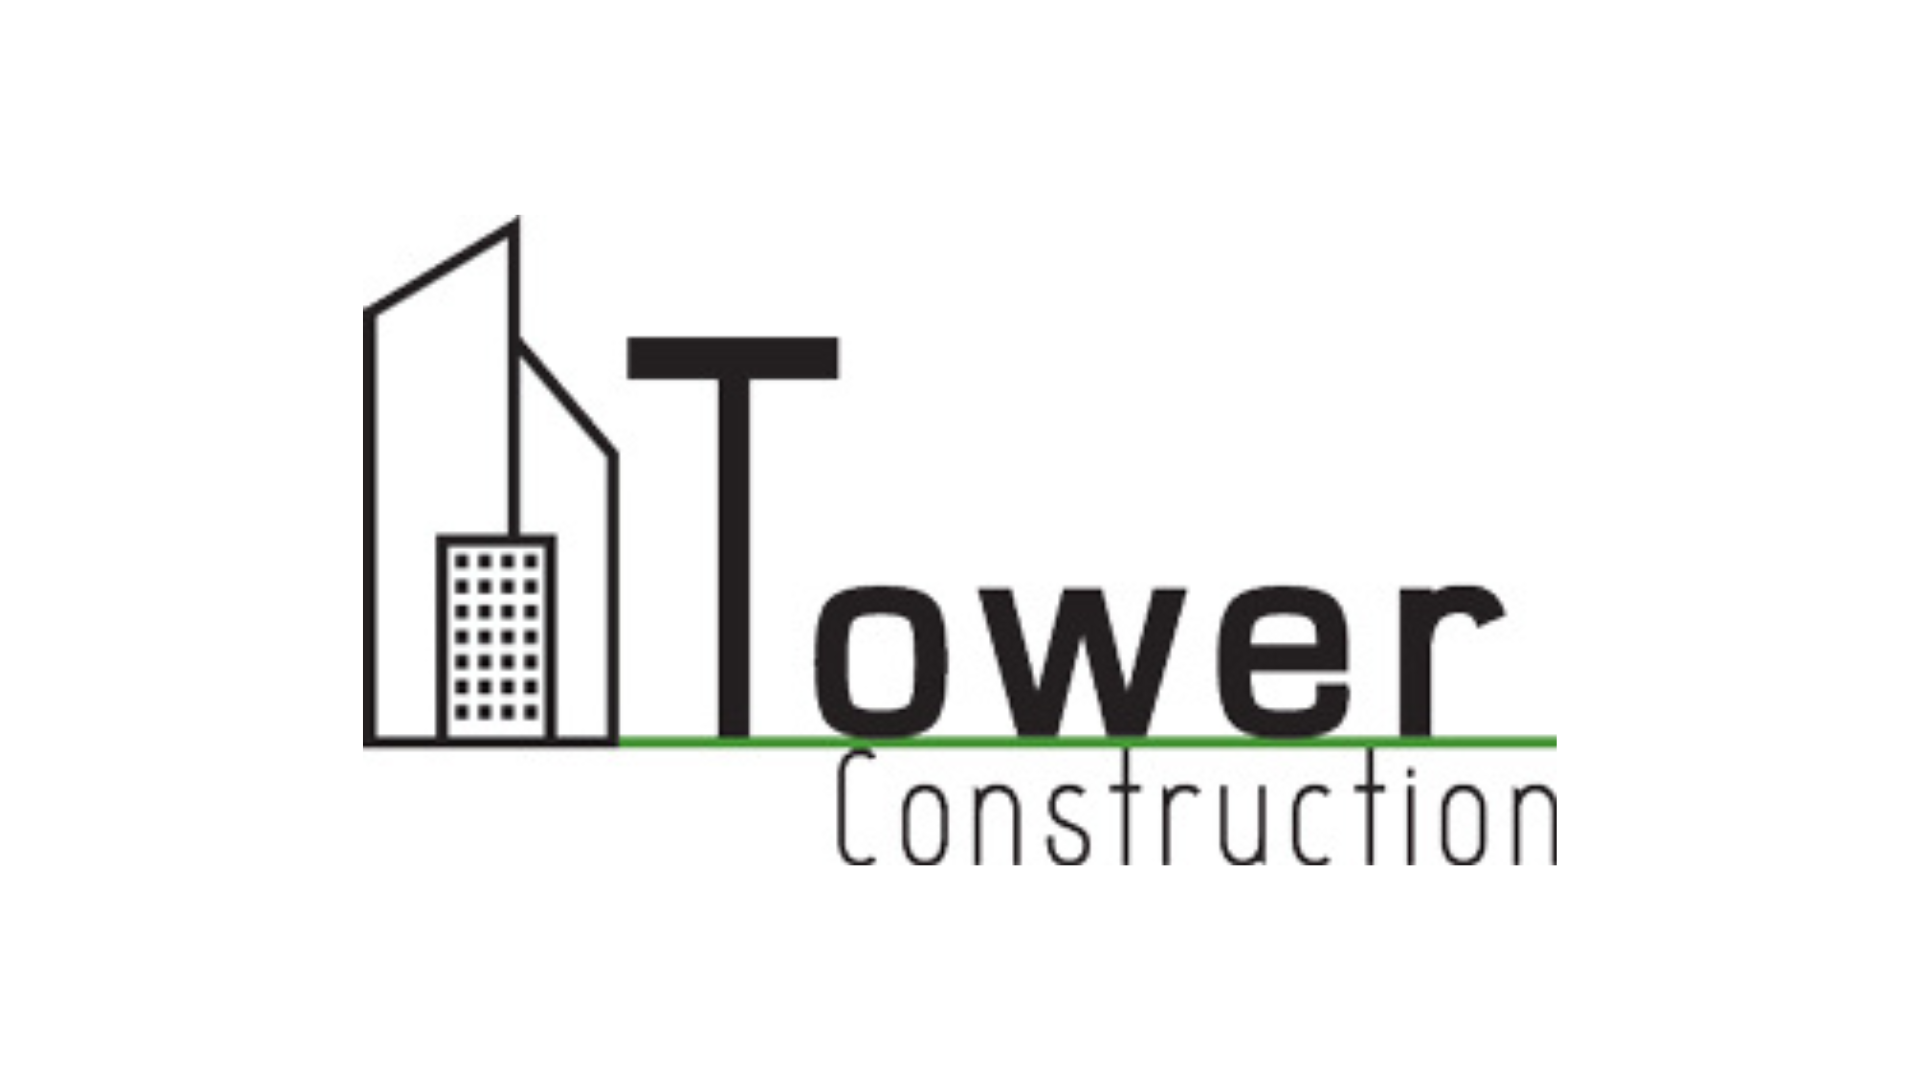 Tower_Construction_logo-for-website-1